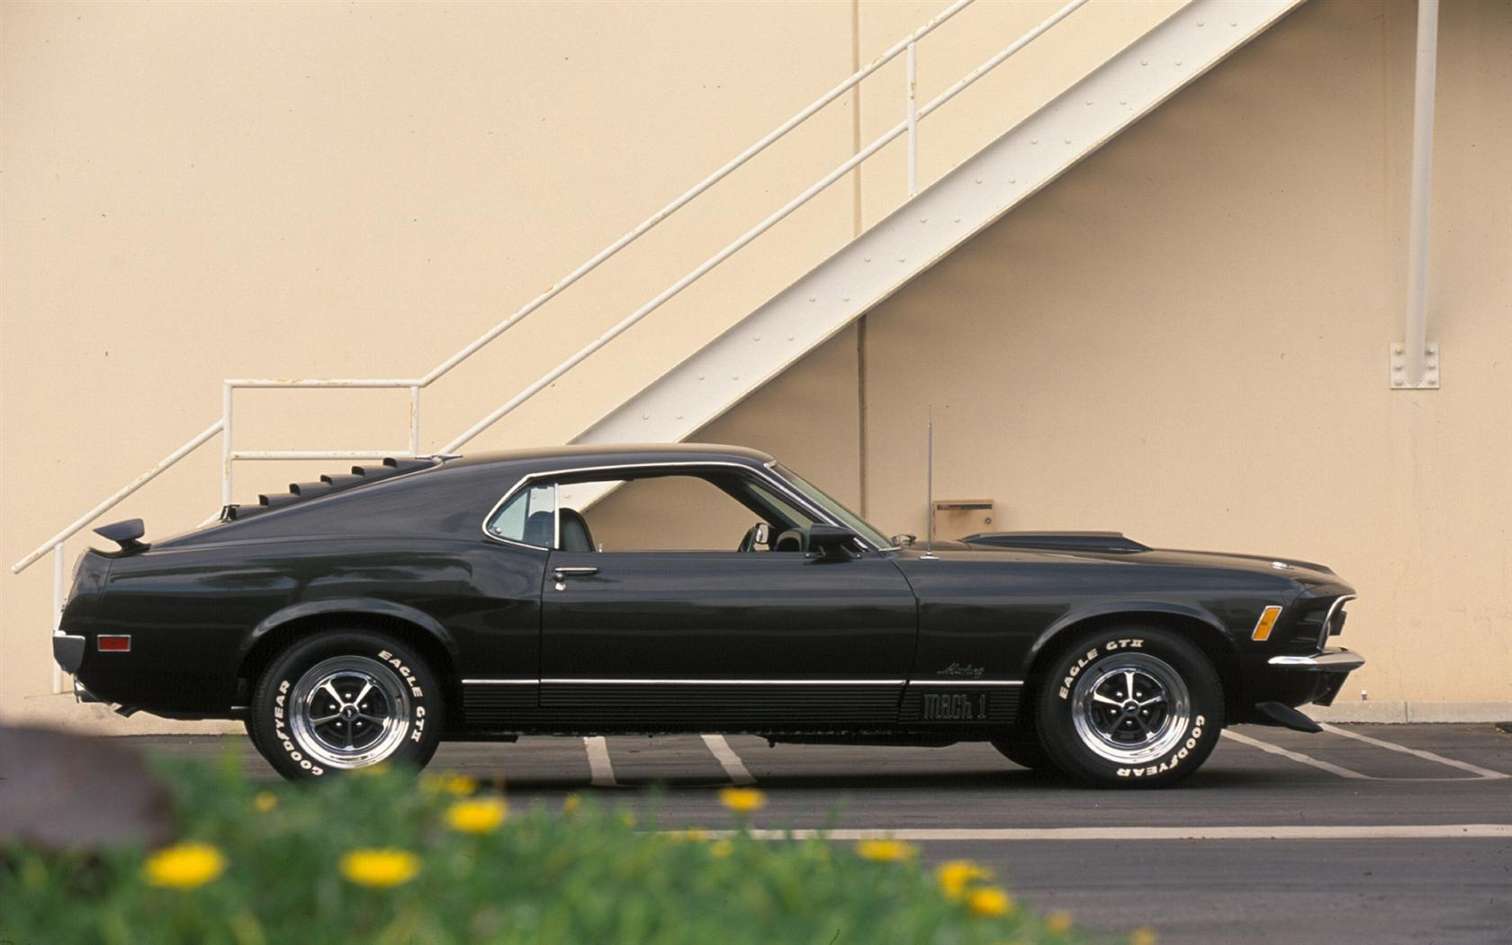 Ford Mustang Mach 1 #7022433